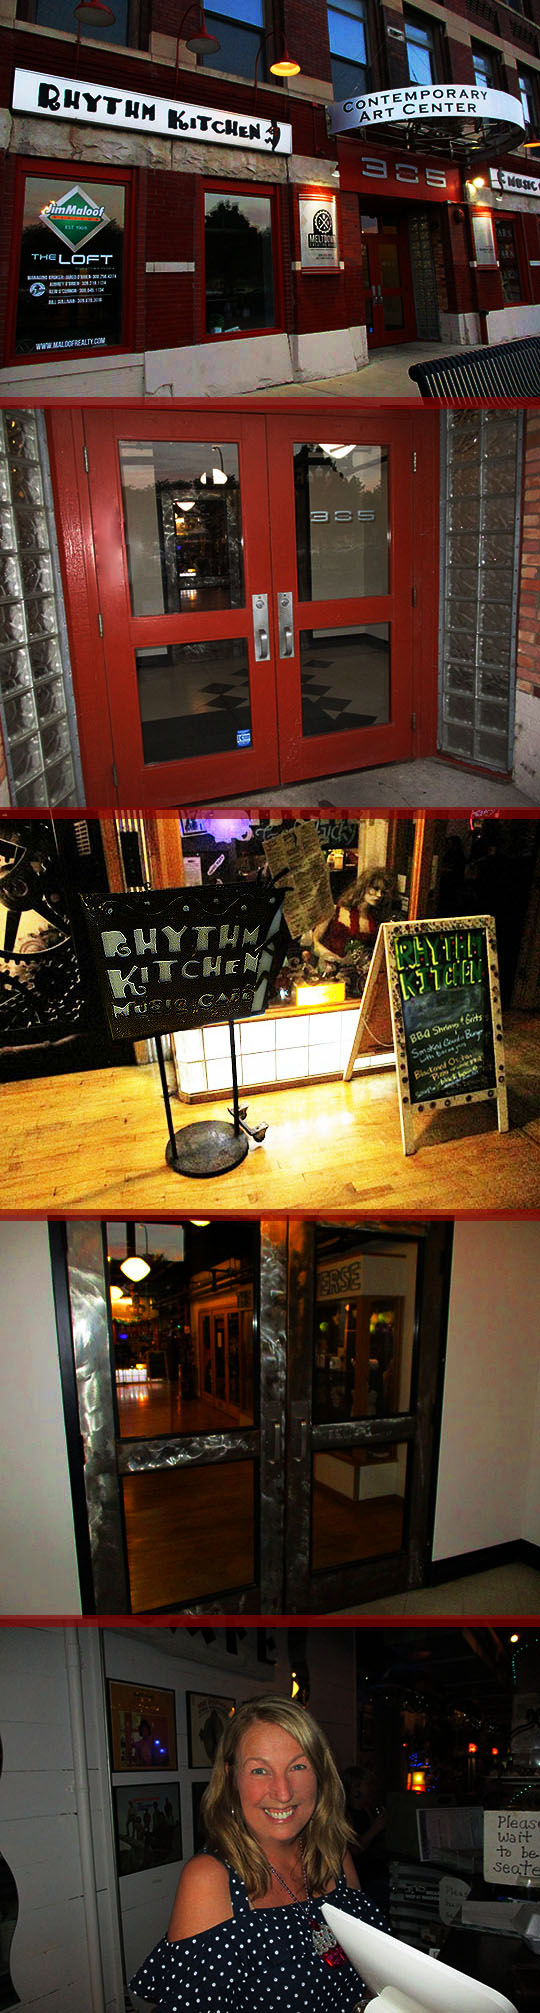 Rhythm Kitchen Music Cafe With Musical